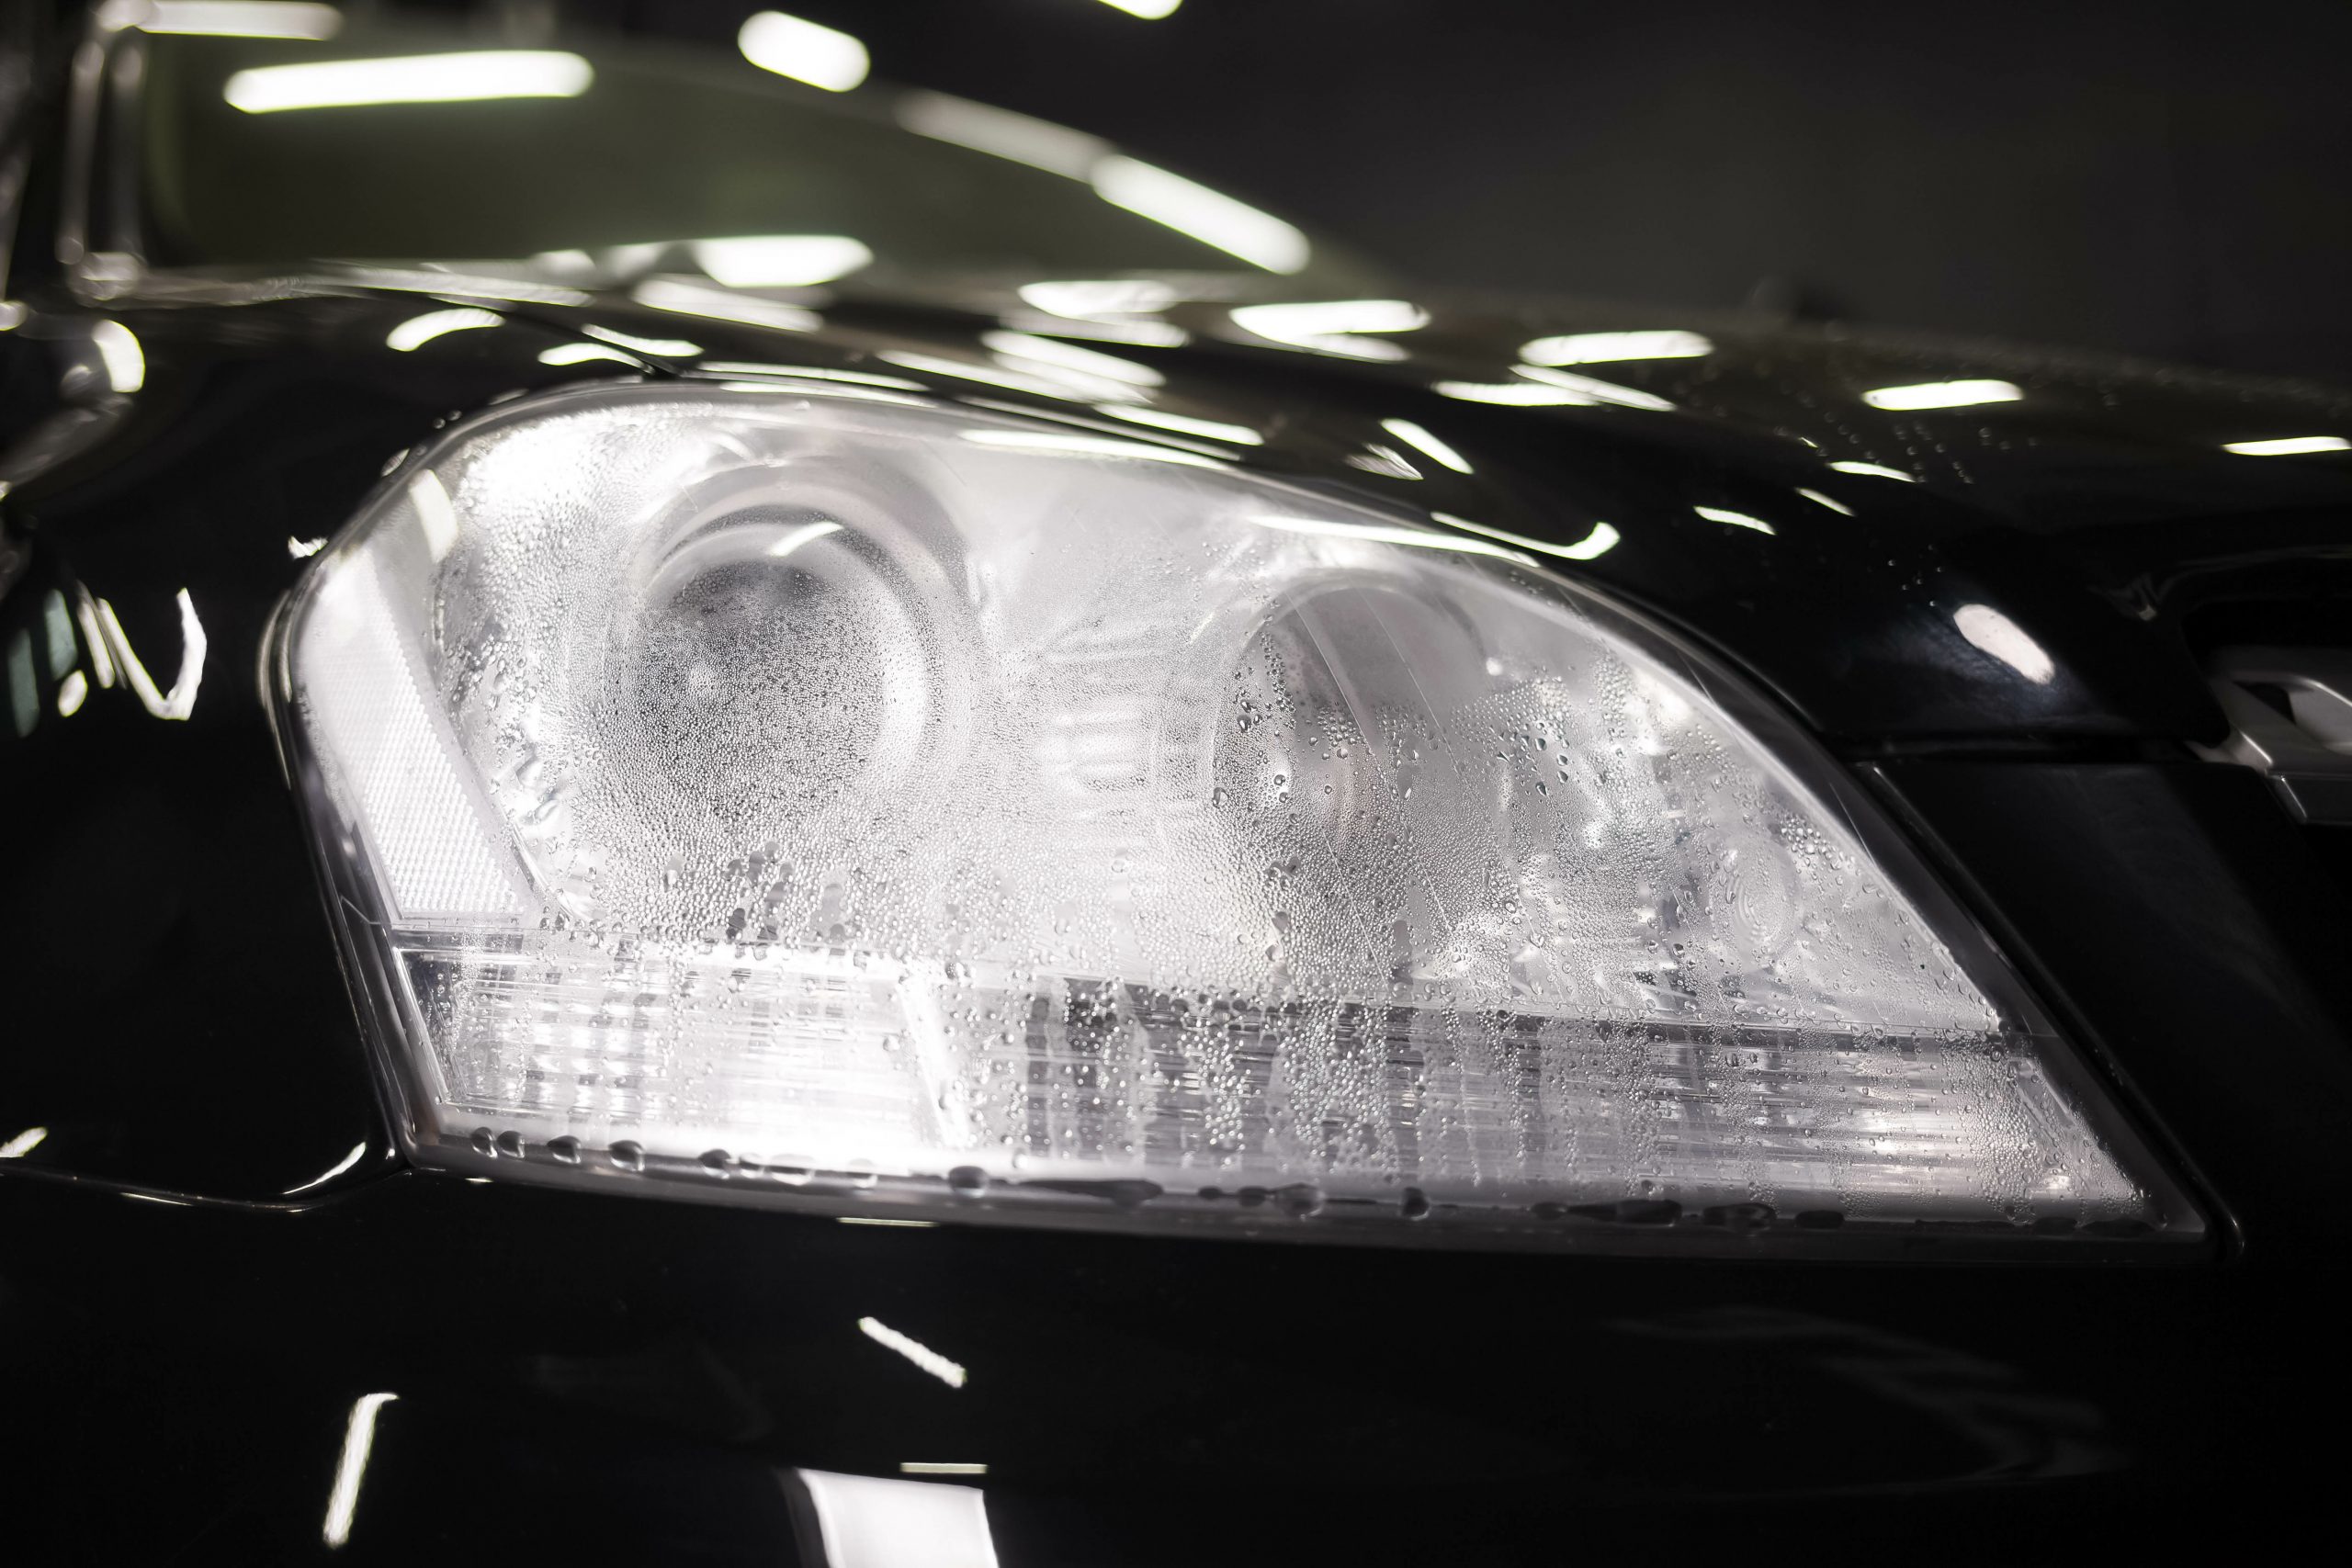 Lighting. Cameras. Action. Prevent Quality and Process Issues with Eigen’s Machine Vision Solution for Automotive Lighting